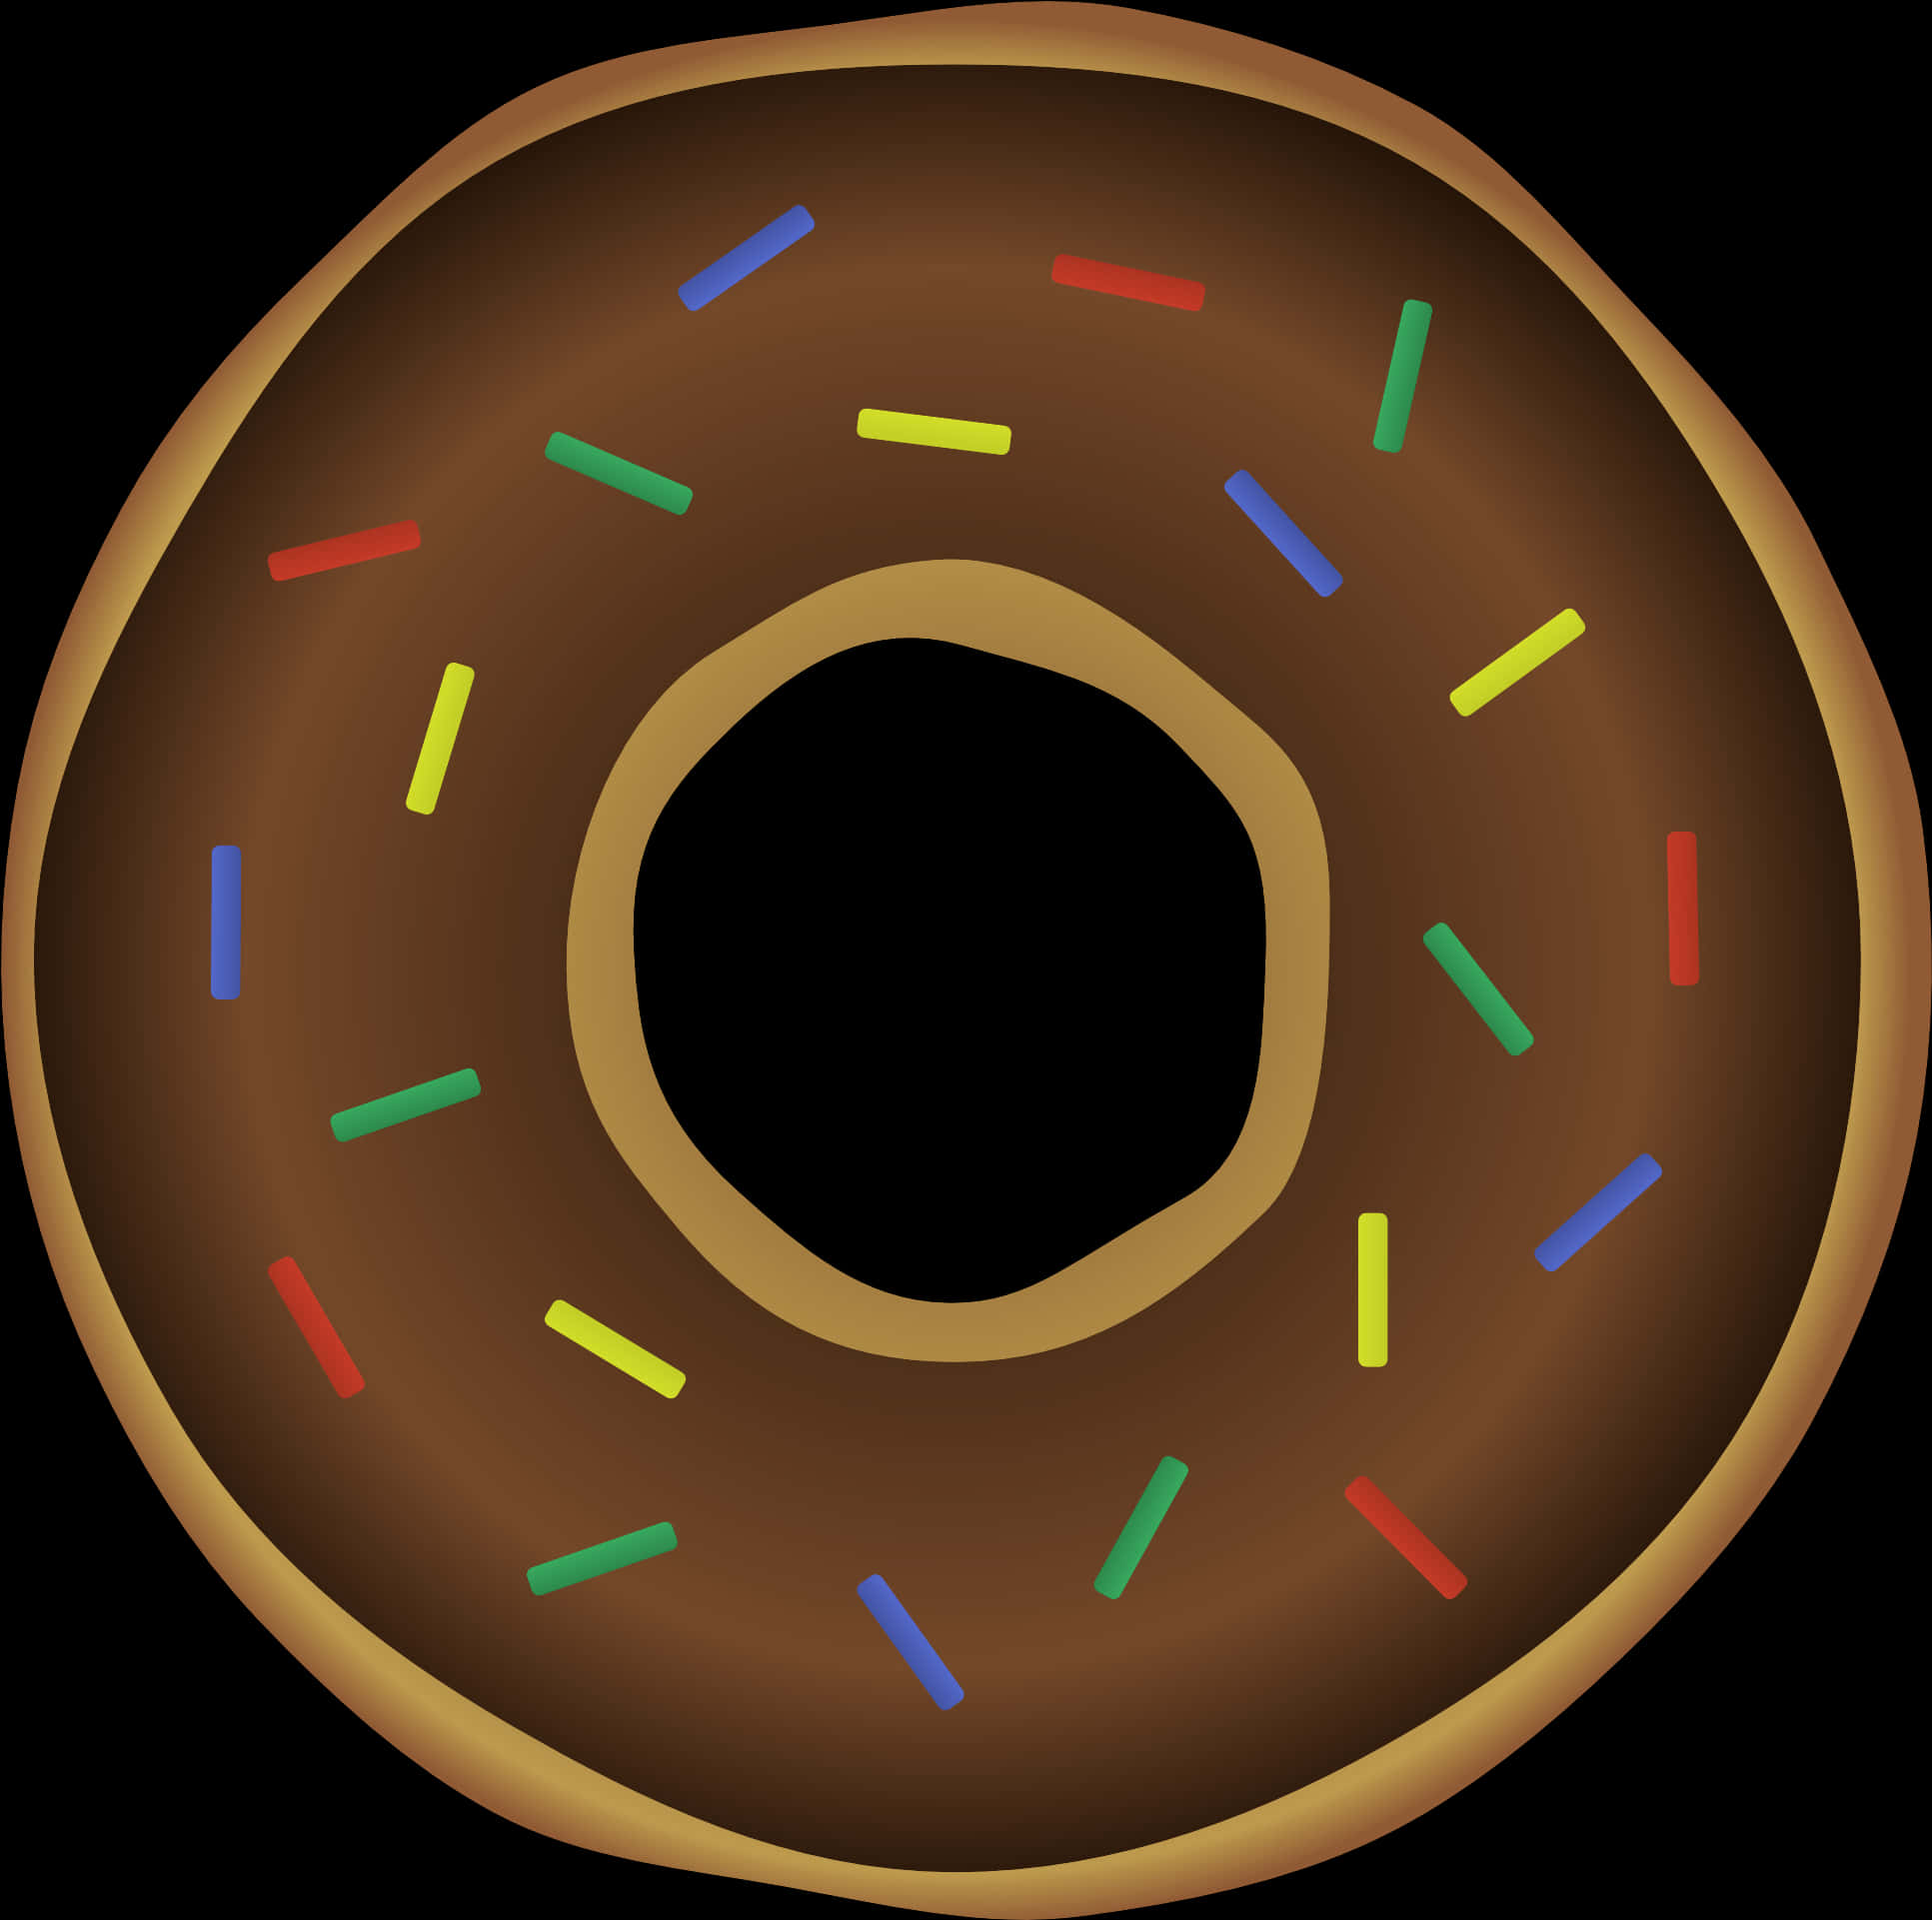 Donut Png